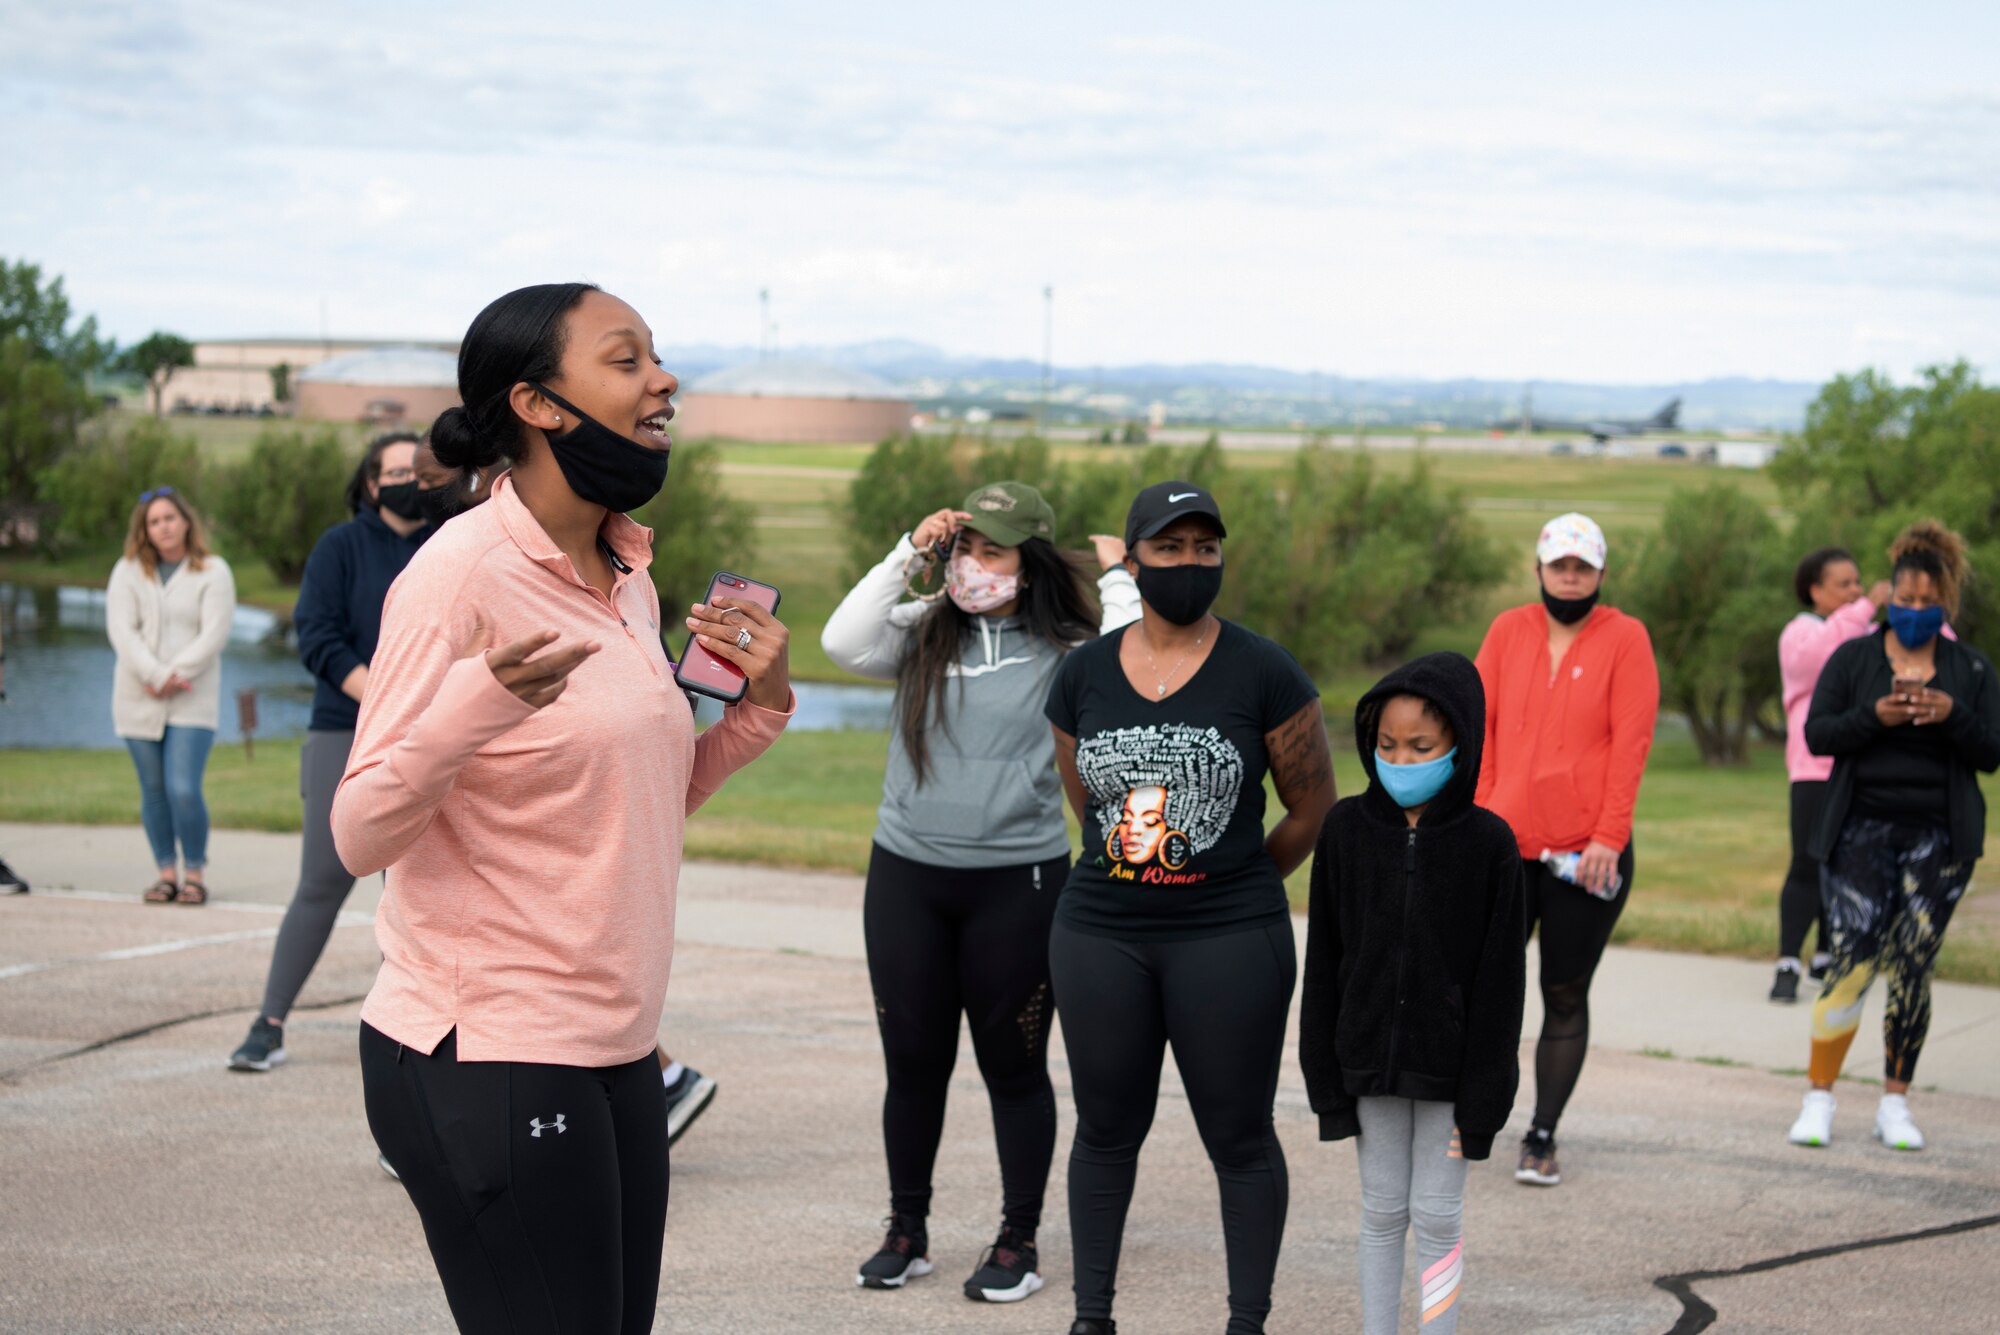 aster Sgt. Jessica Wheeler, the 28th Force Support Squadron section chief of readiness and plans, talks to participants of a memorial walk for Juneteenth at Ellsworth Air Force Base, S.D., June 19, 2020.